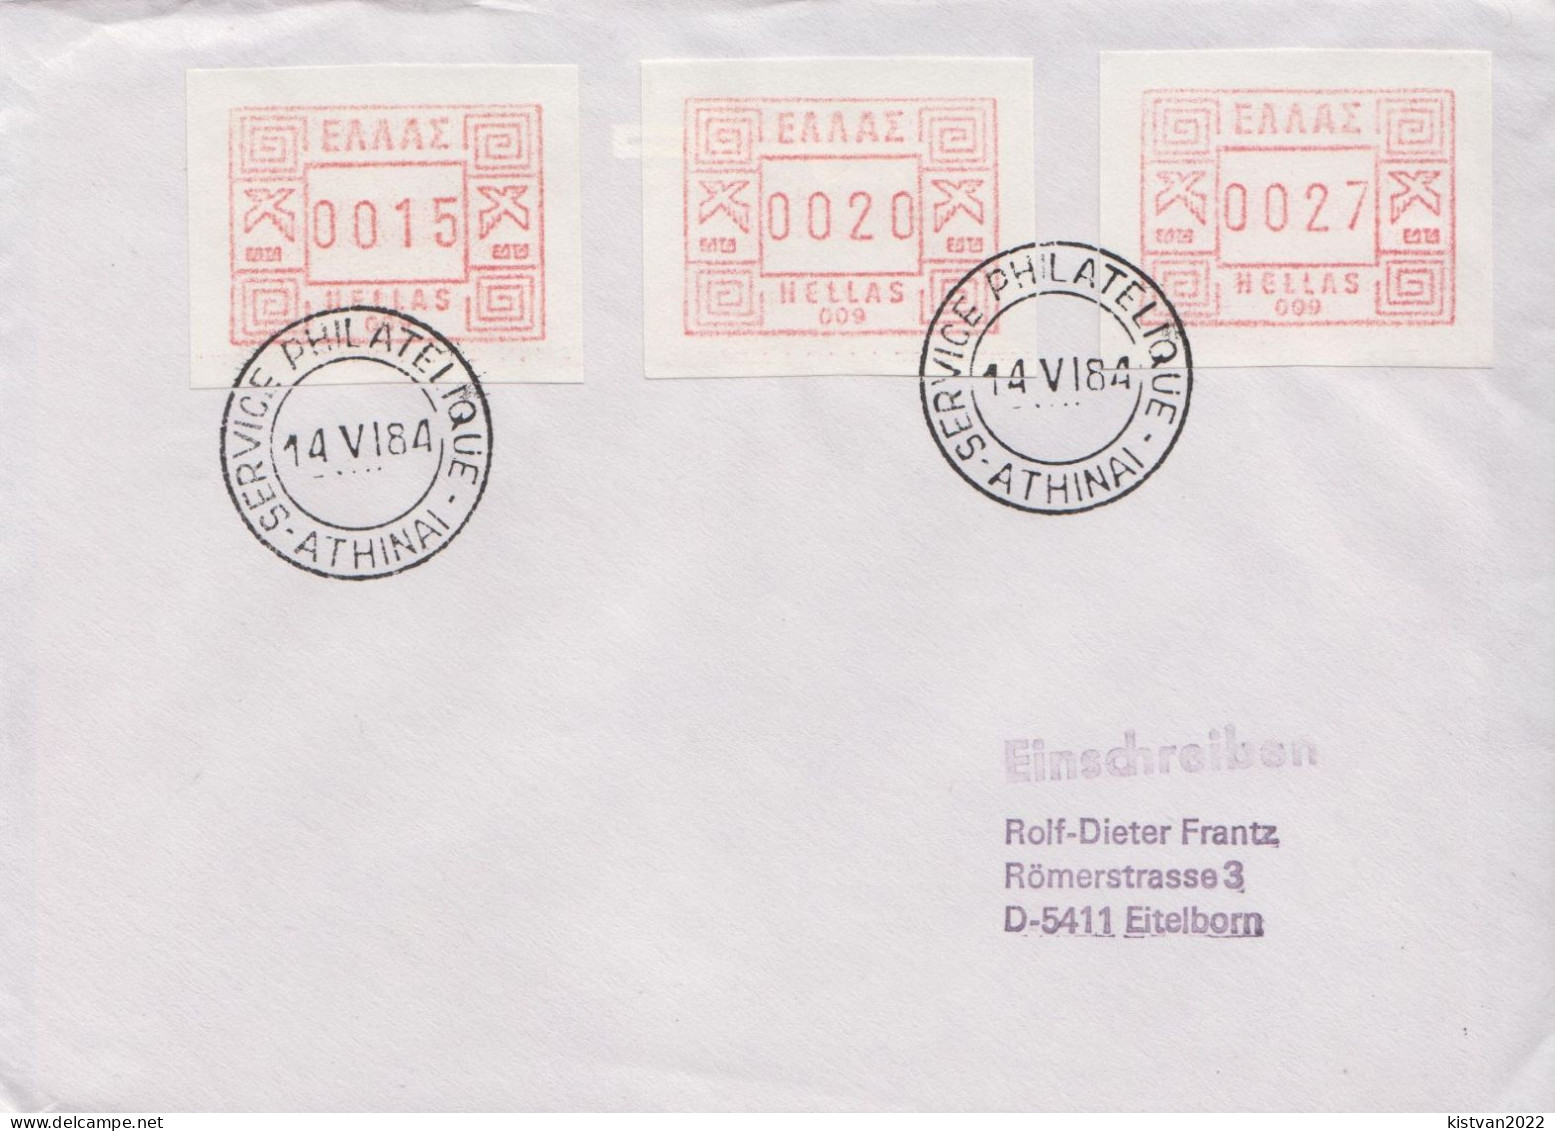 Postal History Cover: Greece Cover With Automat Stamps - Machine Labels [ATM]